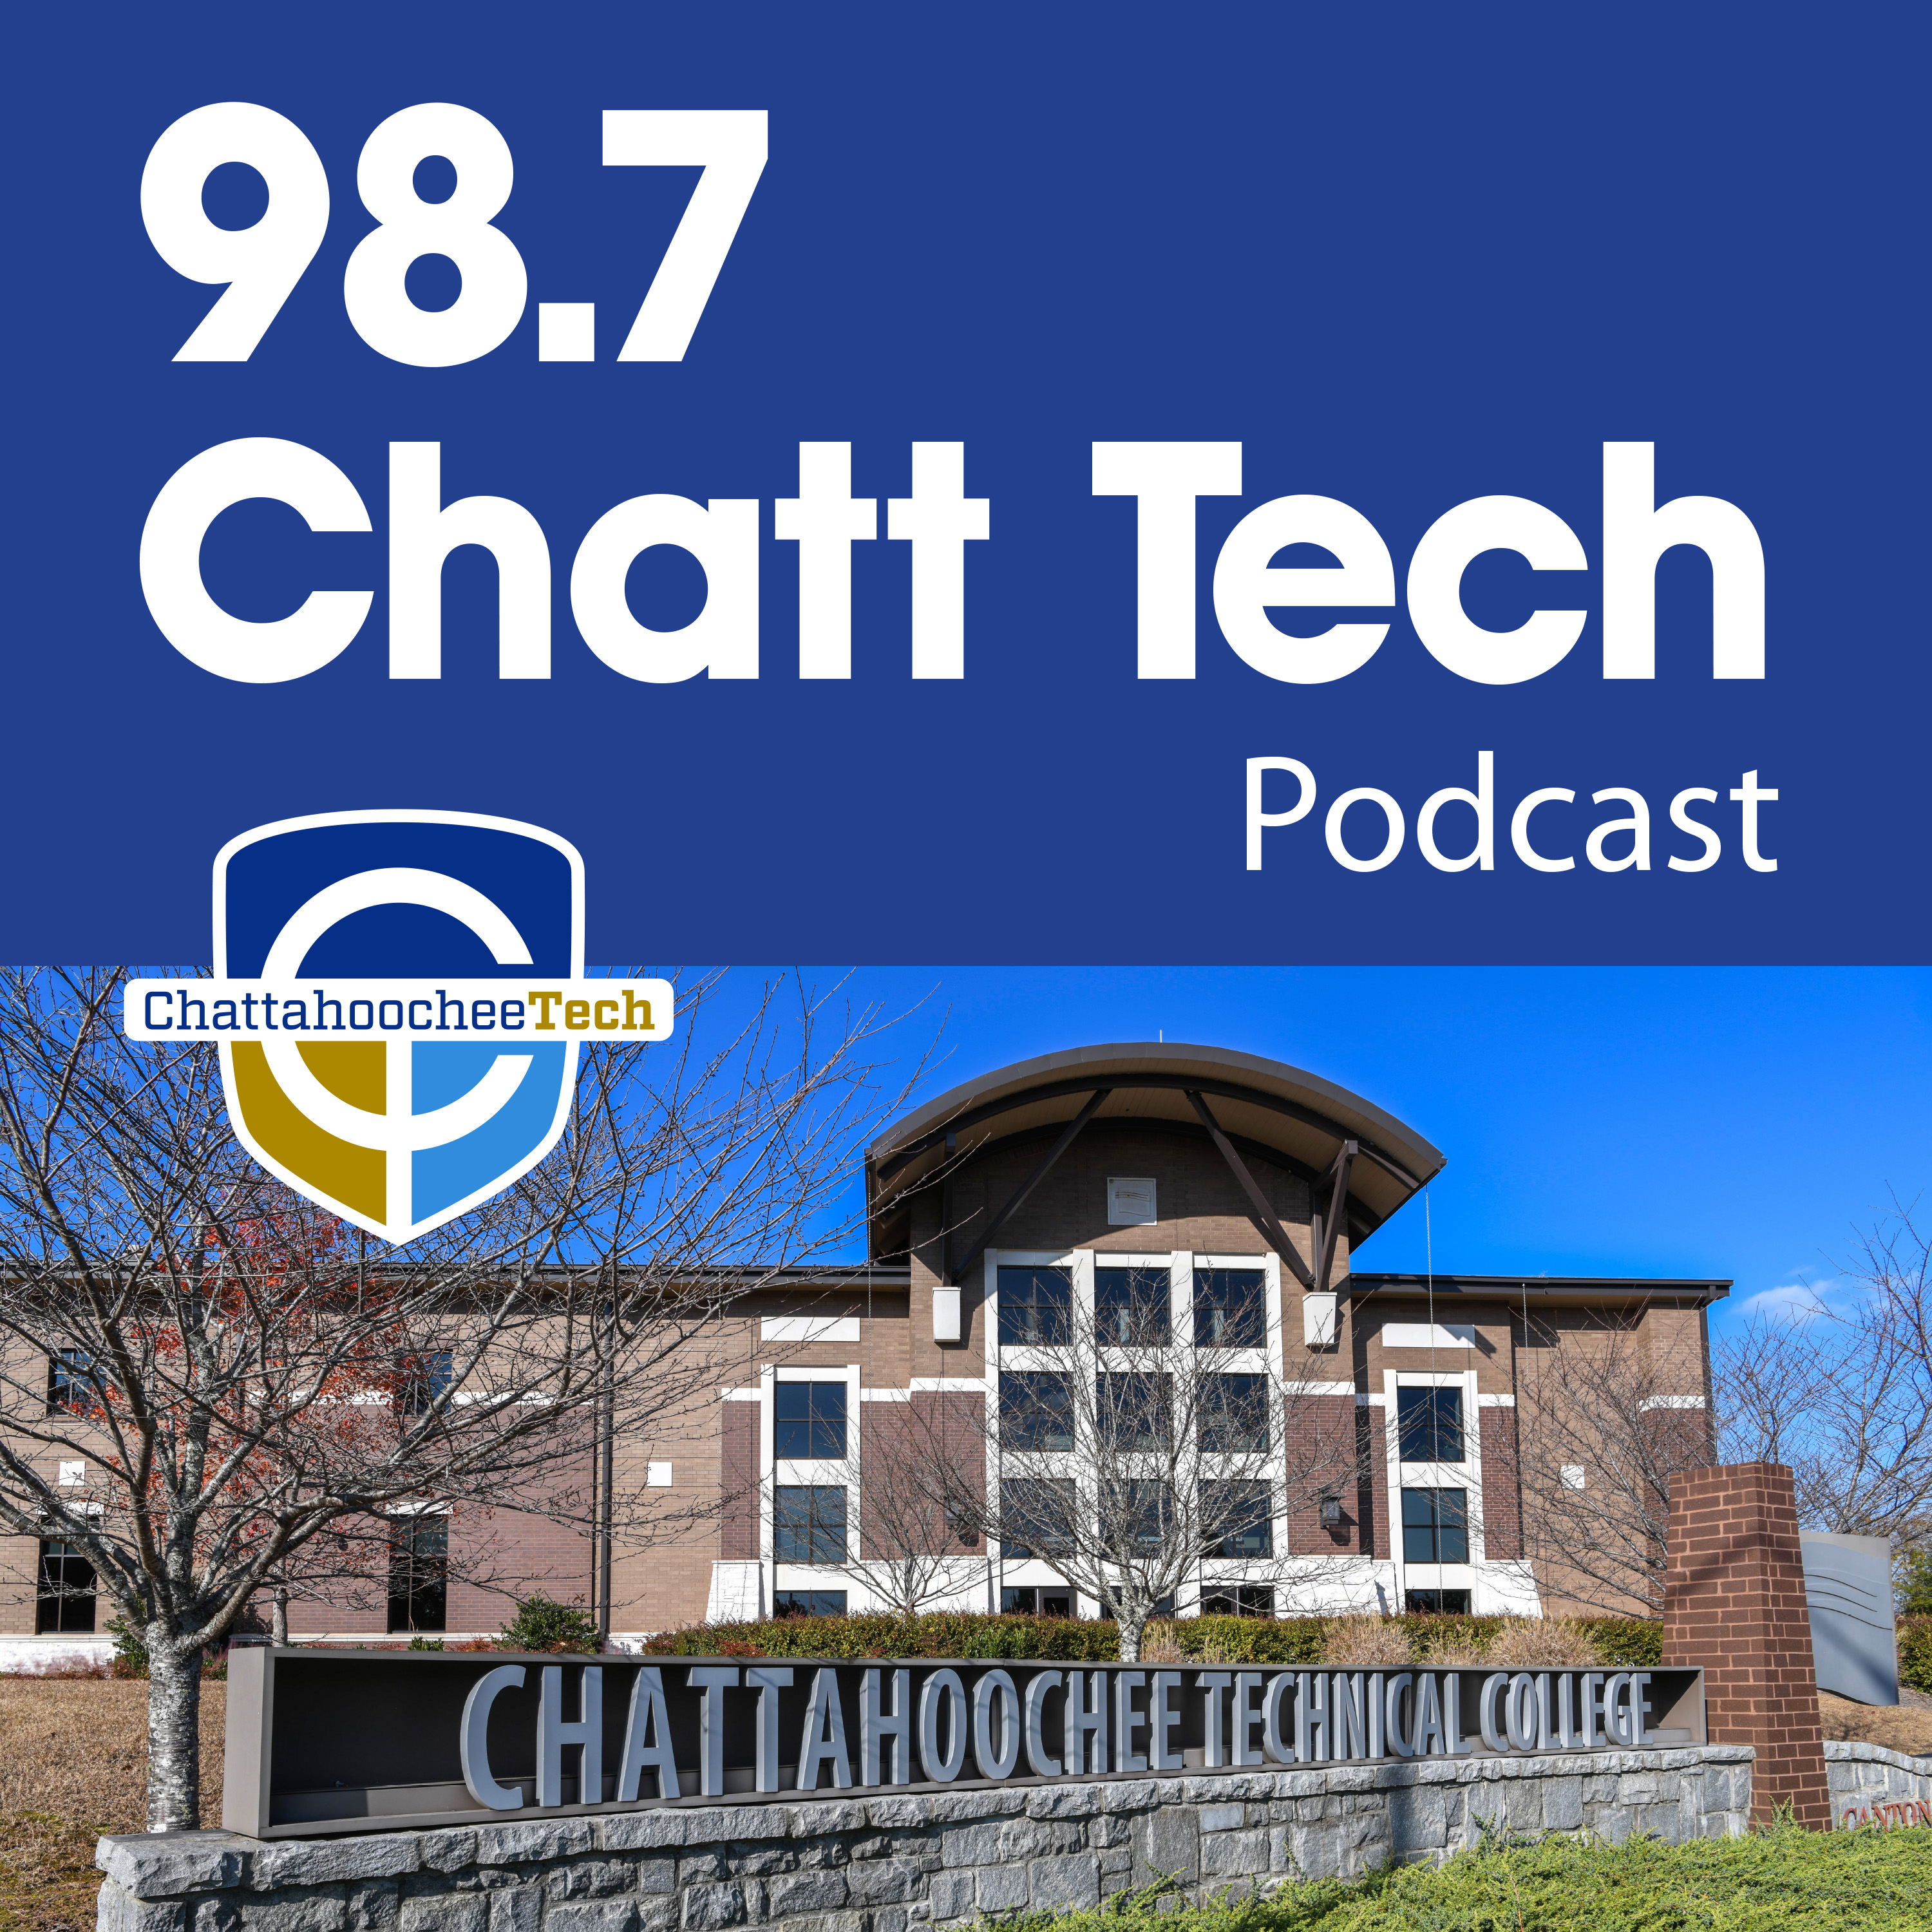 98.7 Chatt Tech: Electrical and Computer Engineering Technology